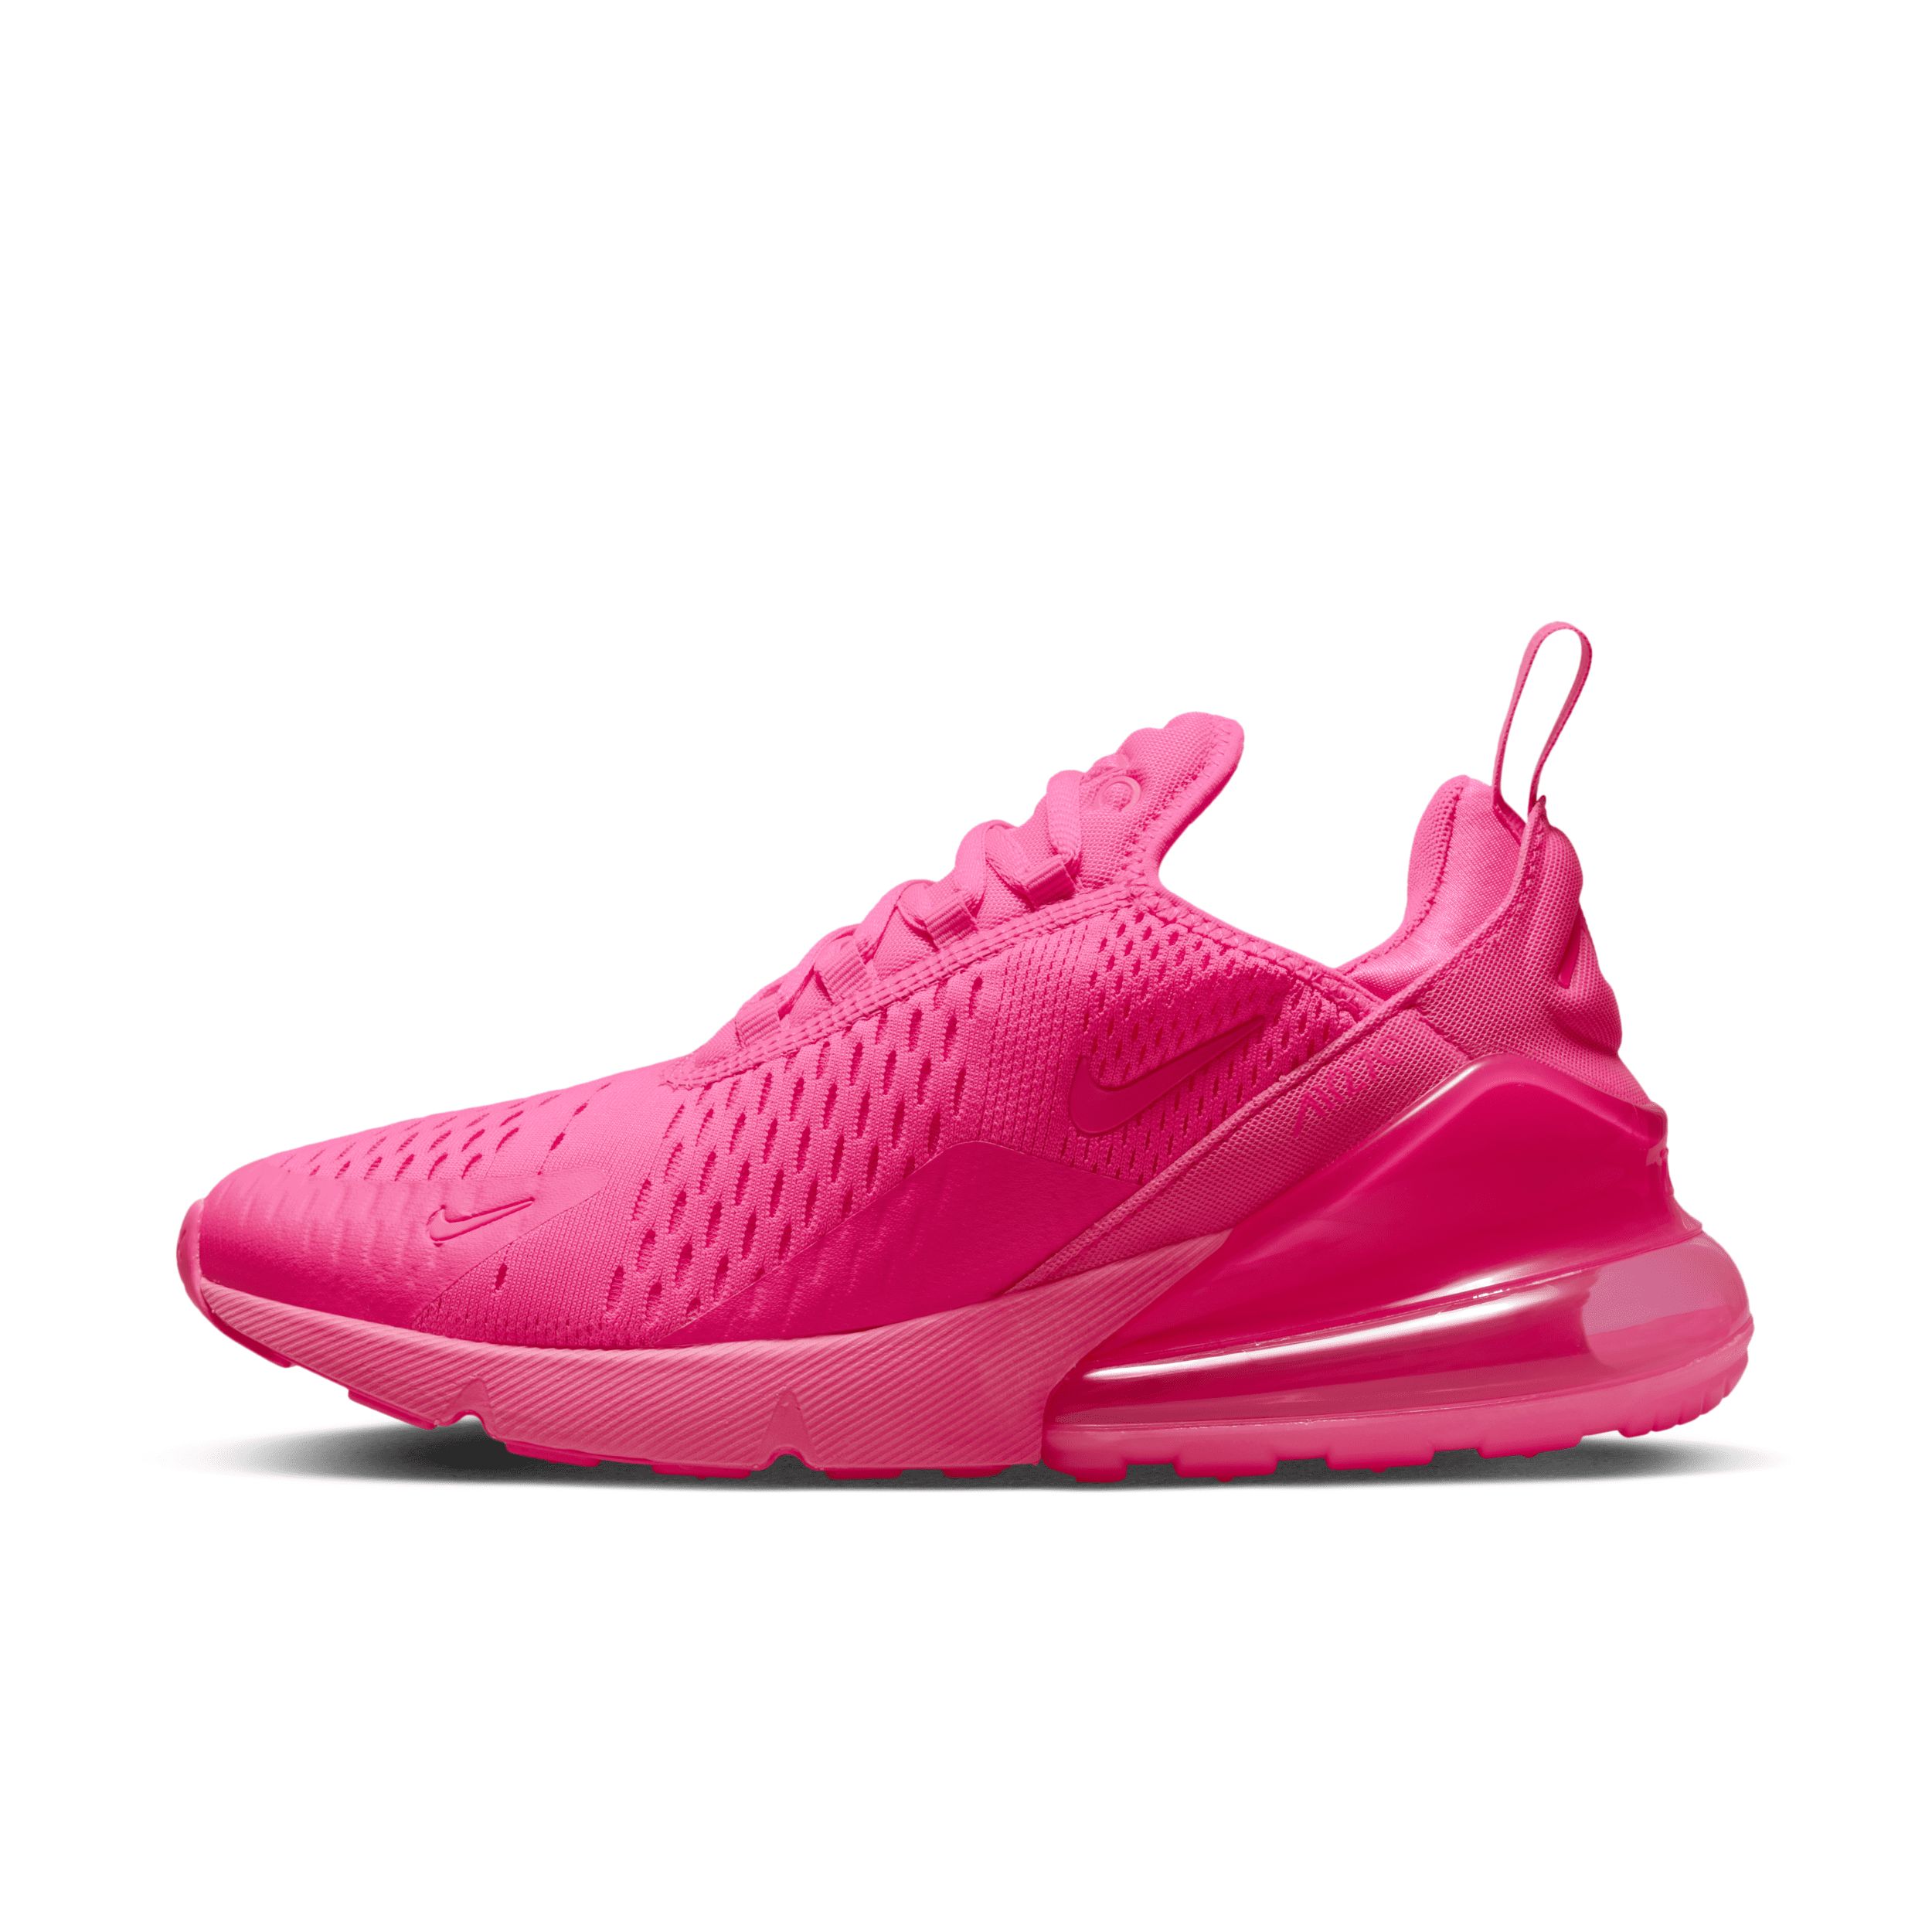 Nike Women's Air Max 270 Shoes in Pink, Size: 5.5 | FD0293-600 | Nike (US)